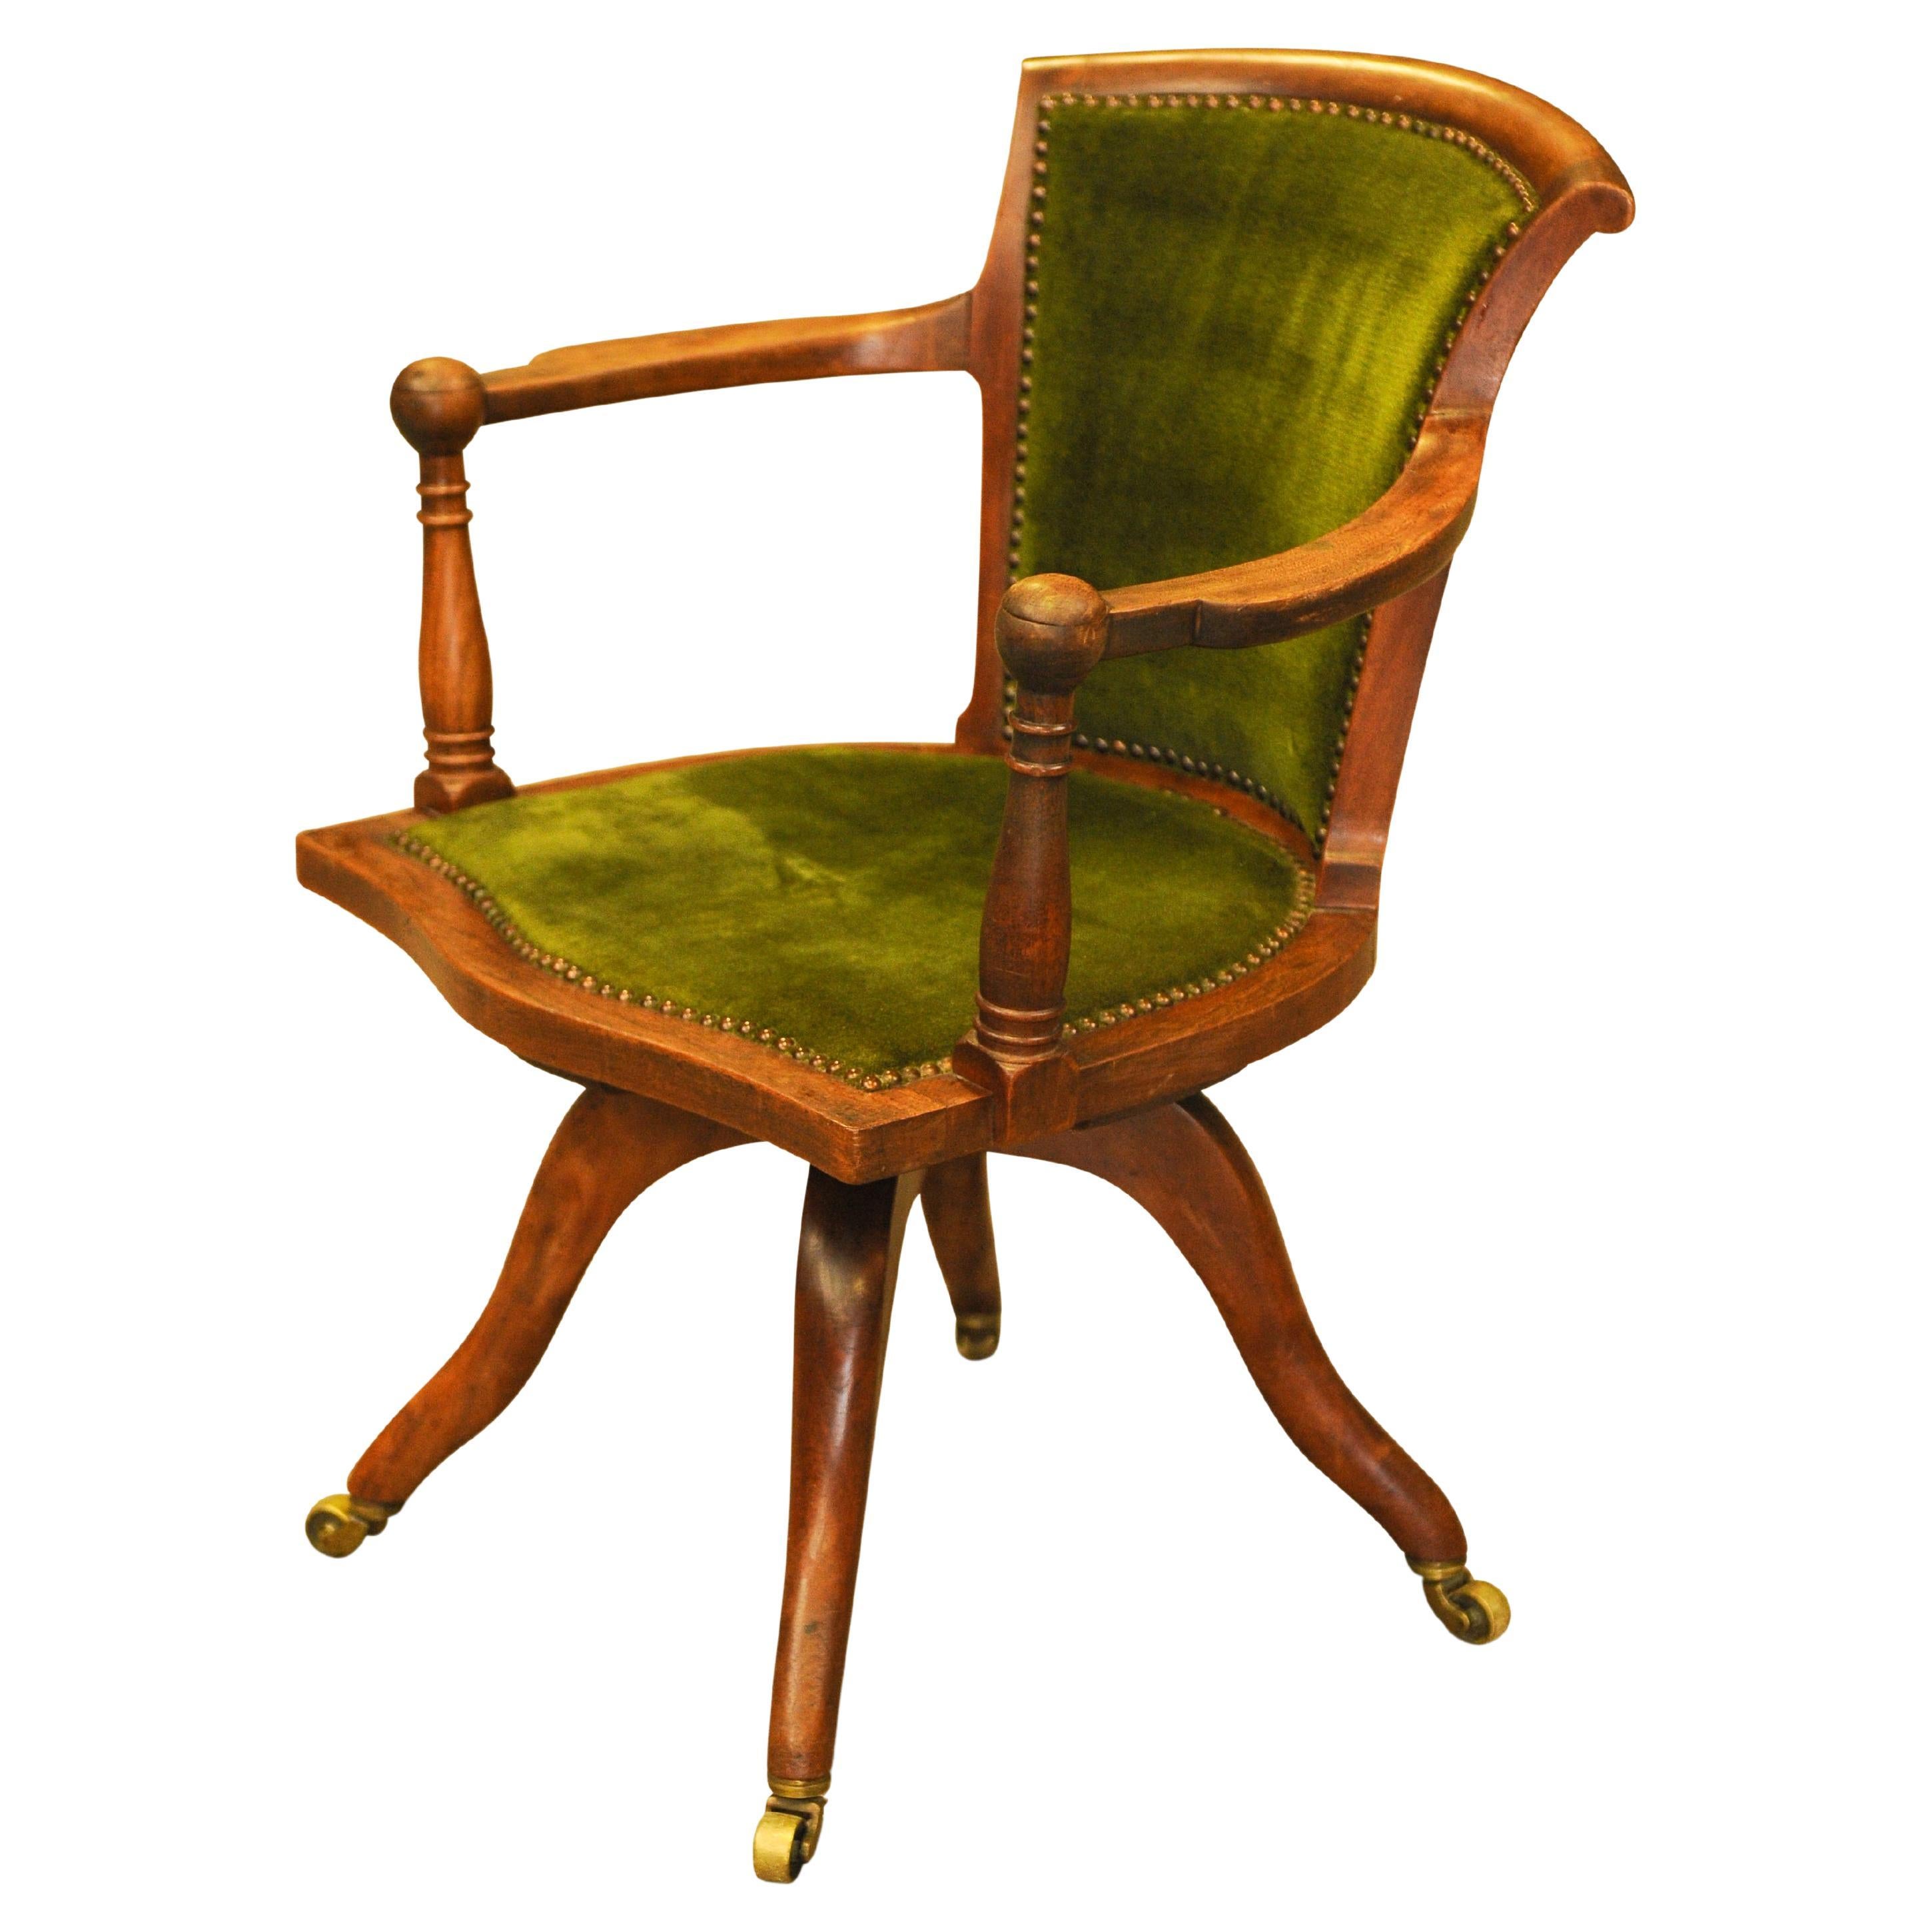 Late 19th Century Victorian Jas Shoolbred Green Velvet Swivel Desk Chair With Brass Castors & Branded Label

Arm height: 67cm

Antique furniture by James Shoolbred and Co. (Jas Shoolbred)

James Shoolbred & Co or also known as Jas Shoolbred was